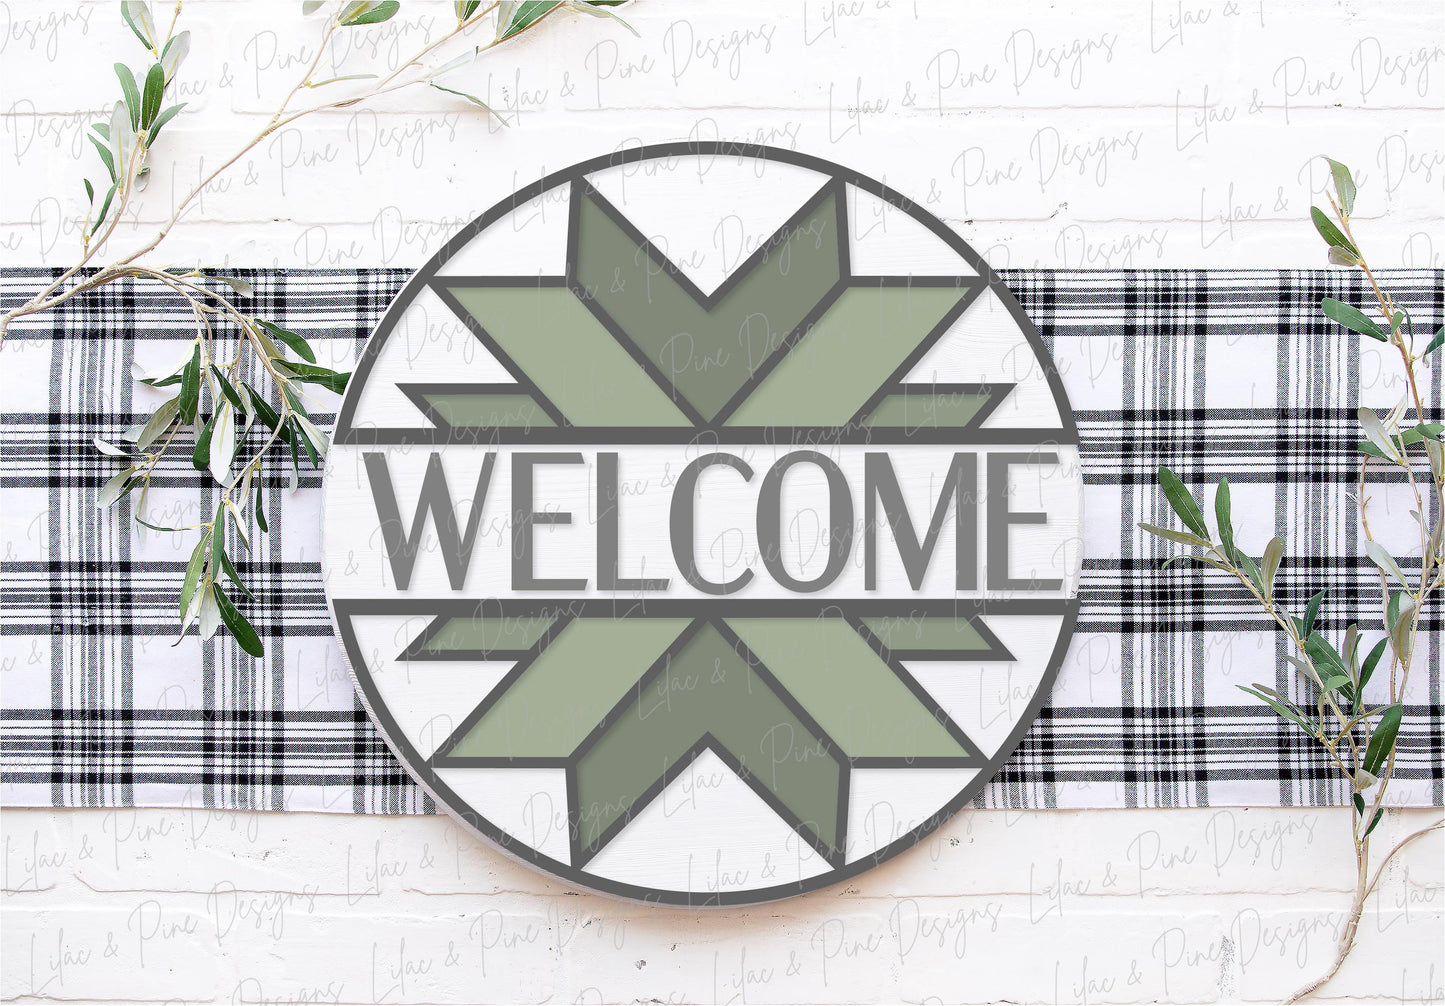 Welcome stained glass quilt round, quilt lover SVG, Welcome SVG, front door decor, round wood sign, name sign, Glowforge Svg, laser cut file